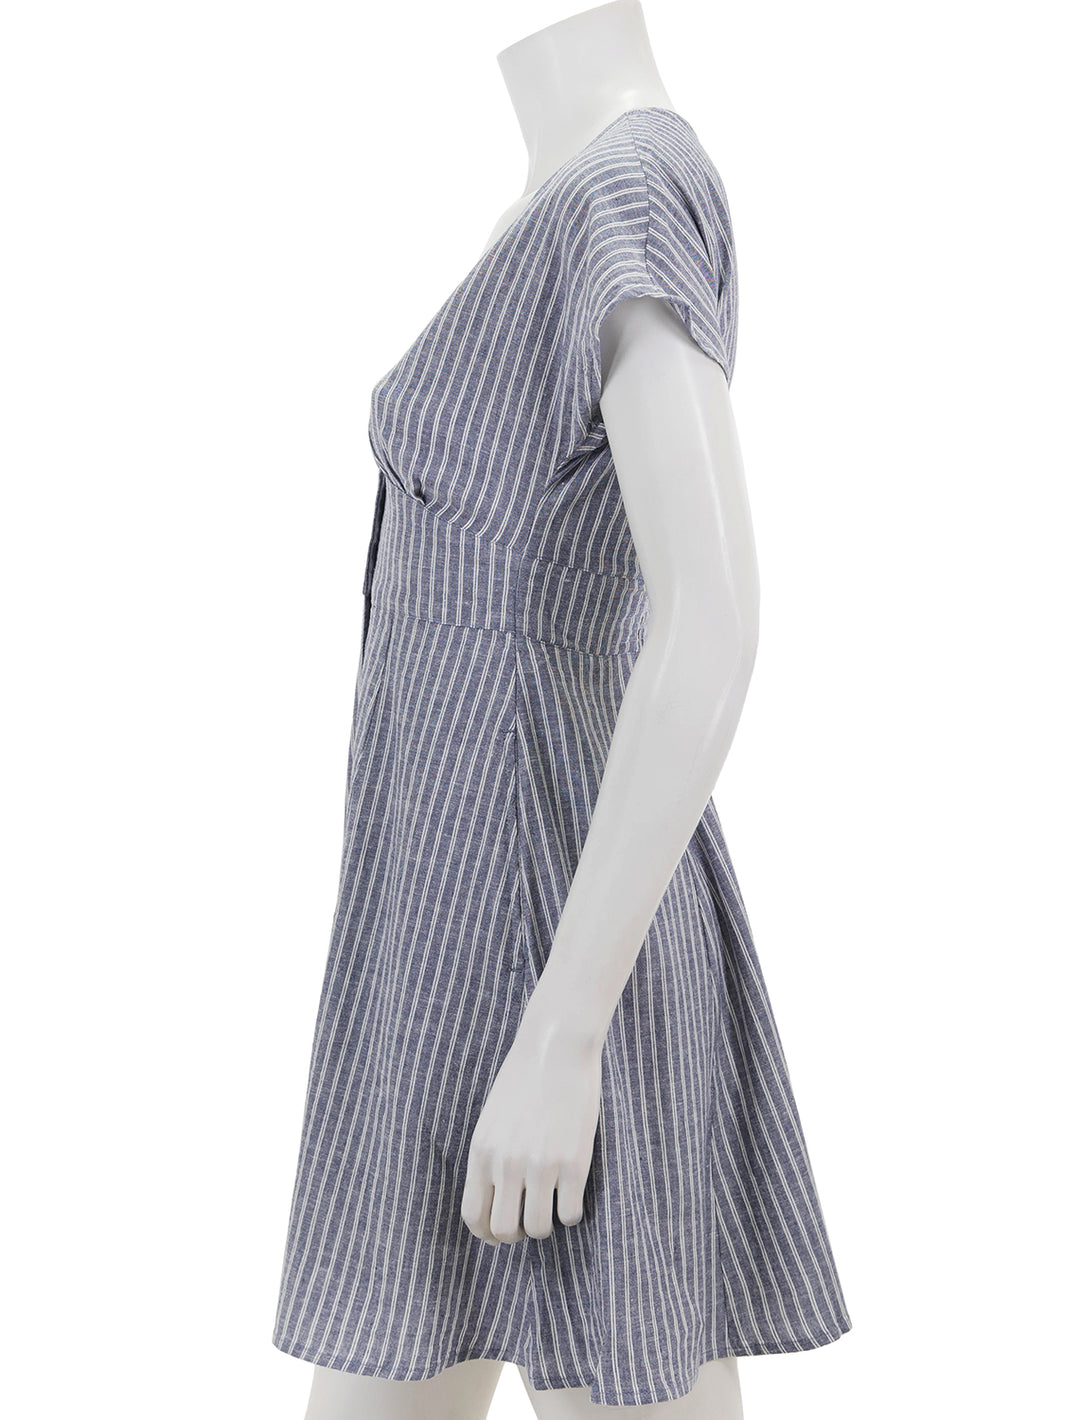 Side view of Marine Layer's camila mini dress in blue and white stripe.